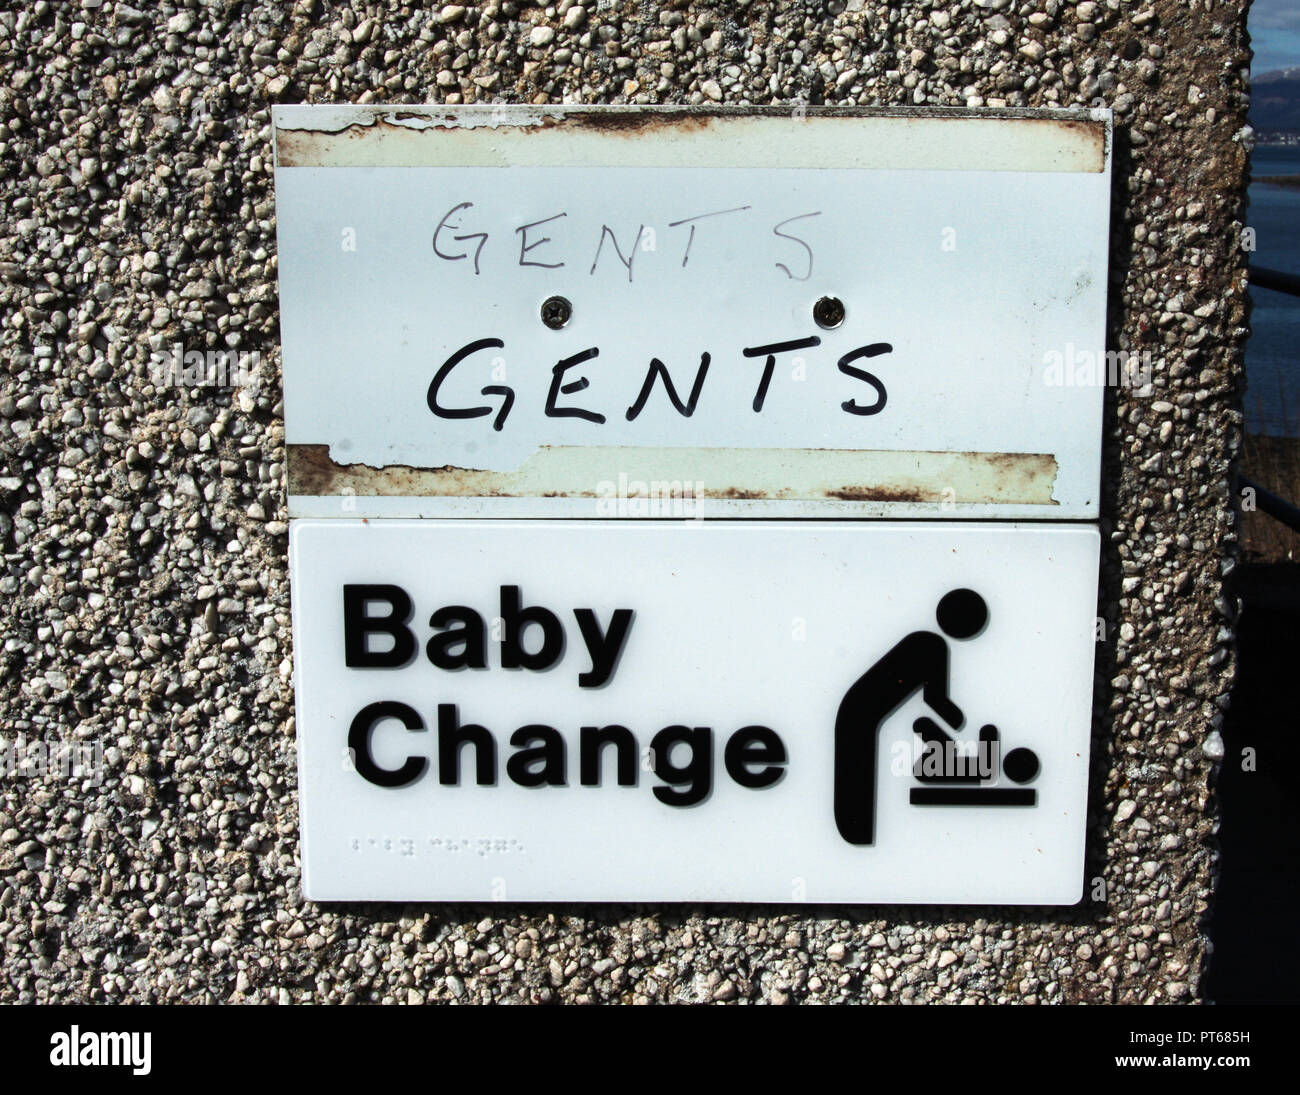 An amusing sign outside a public toilet begs the question; is the changing for the baby or the gent? Stock Photo